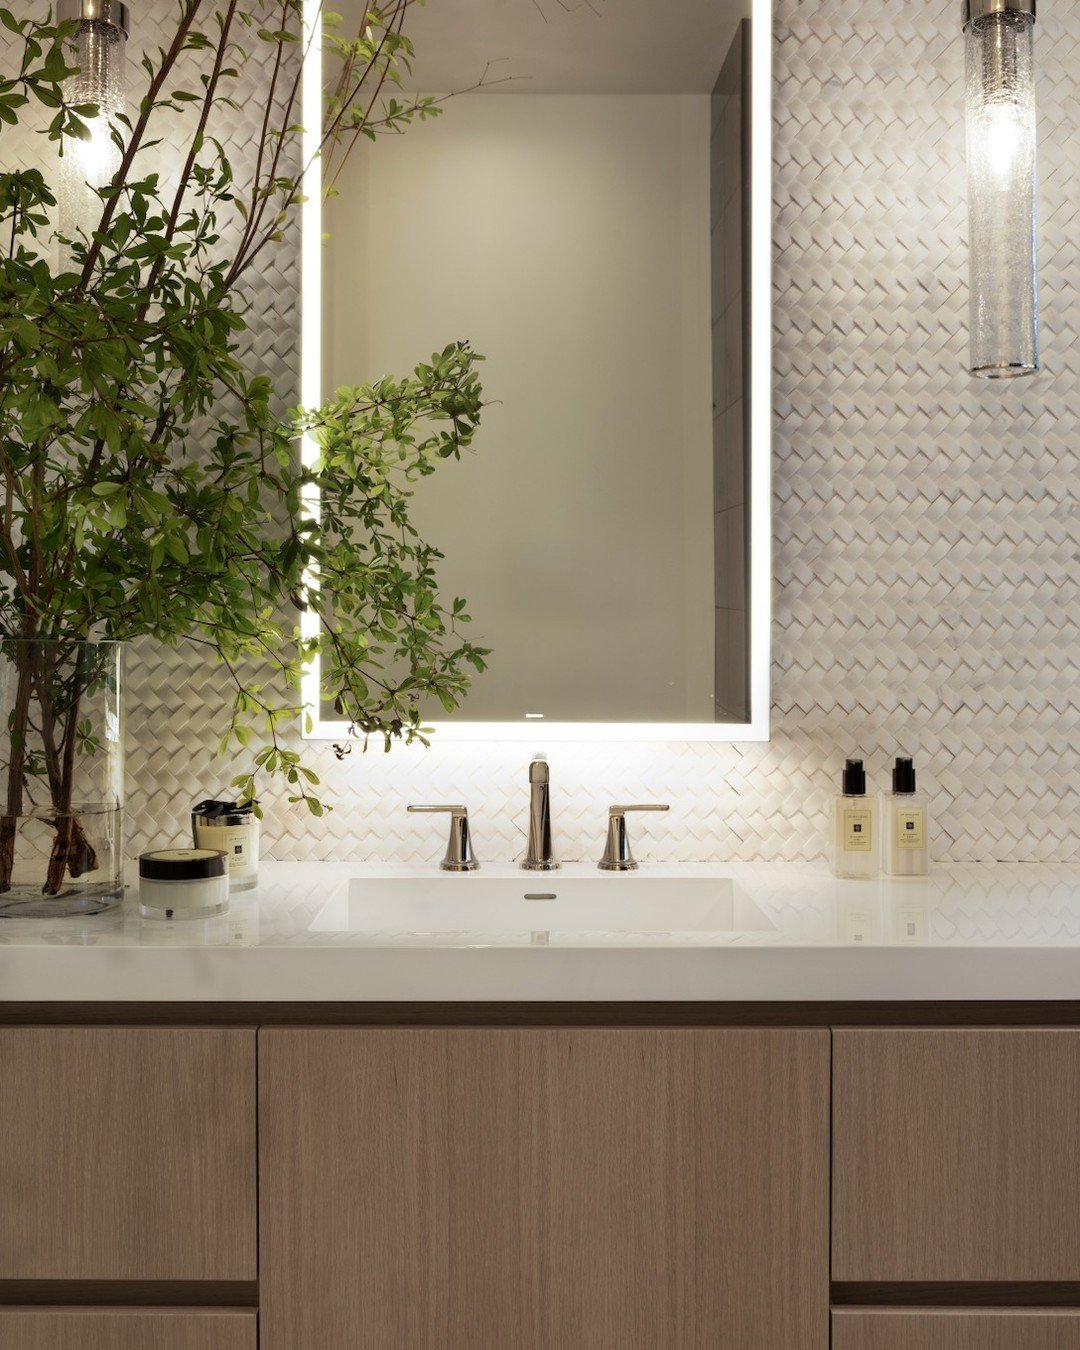 Client spotlight: Master bath elegance is reimagined in a local abode, where @lacavadesigns Kubista vanities meet the ambient glow of @casabath Up mirrors, enhanced by sleek LED illumination. Modern living, thoughtfully designed.

Ready to update you